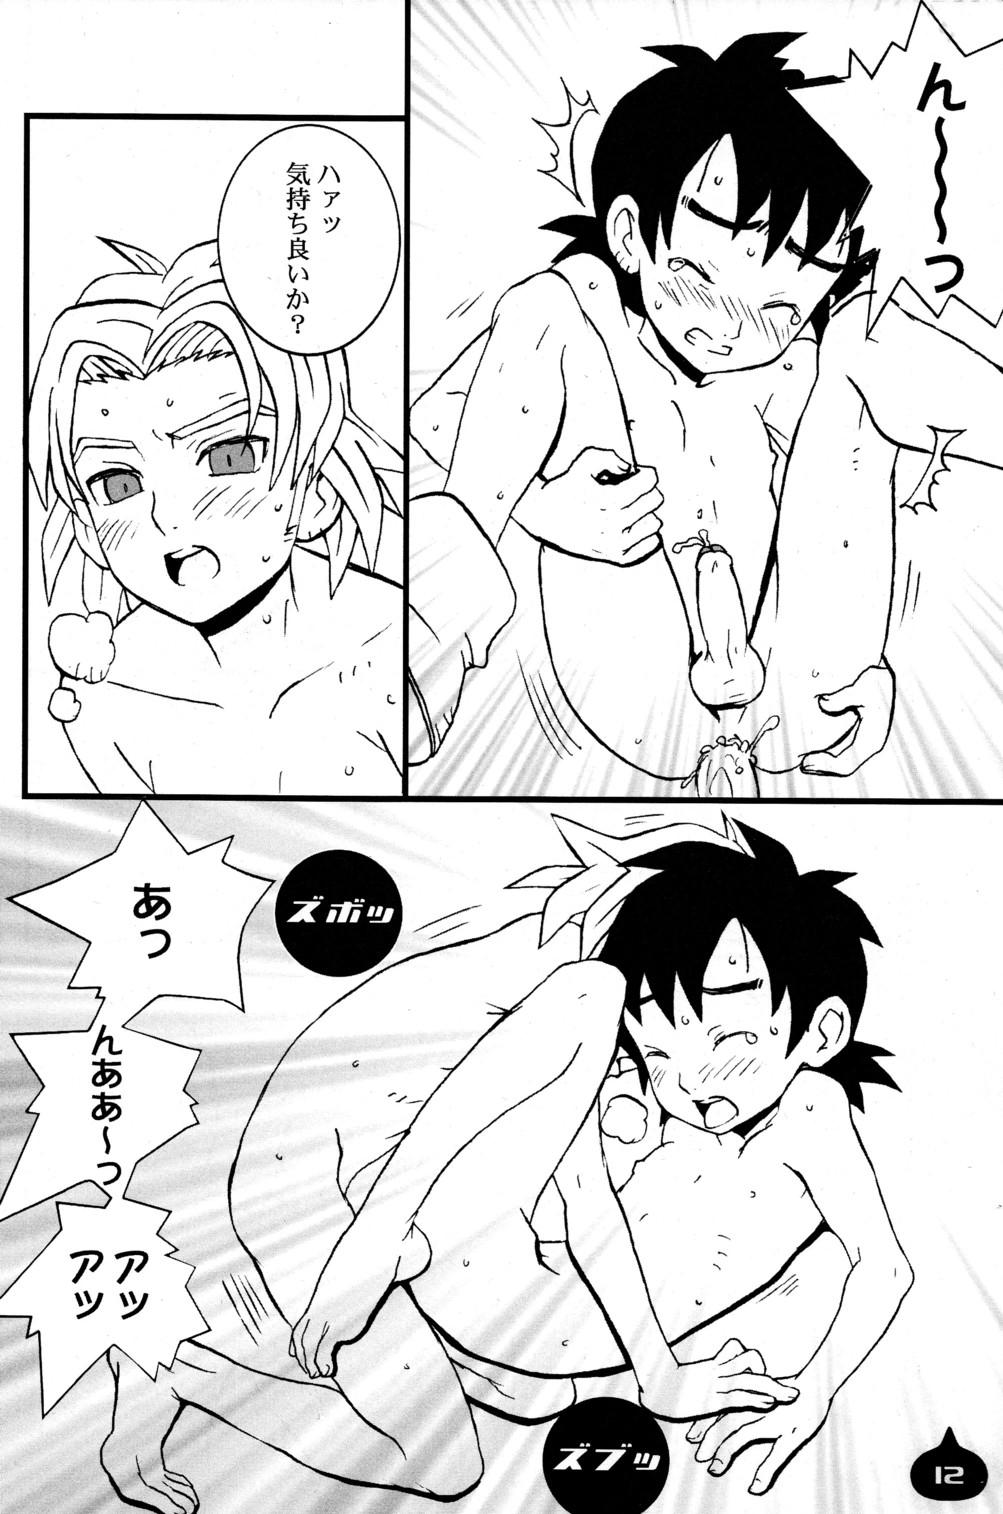 Anime LITTLE L - Dragon quest vii Lord of lords ryu knight | haou taikei ryuu knight Gay Deepthroat - Page 11